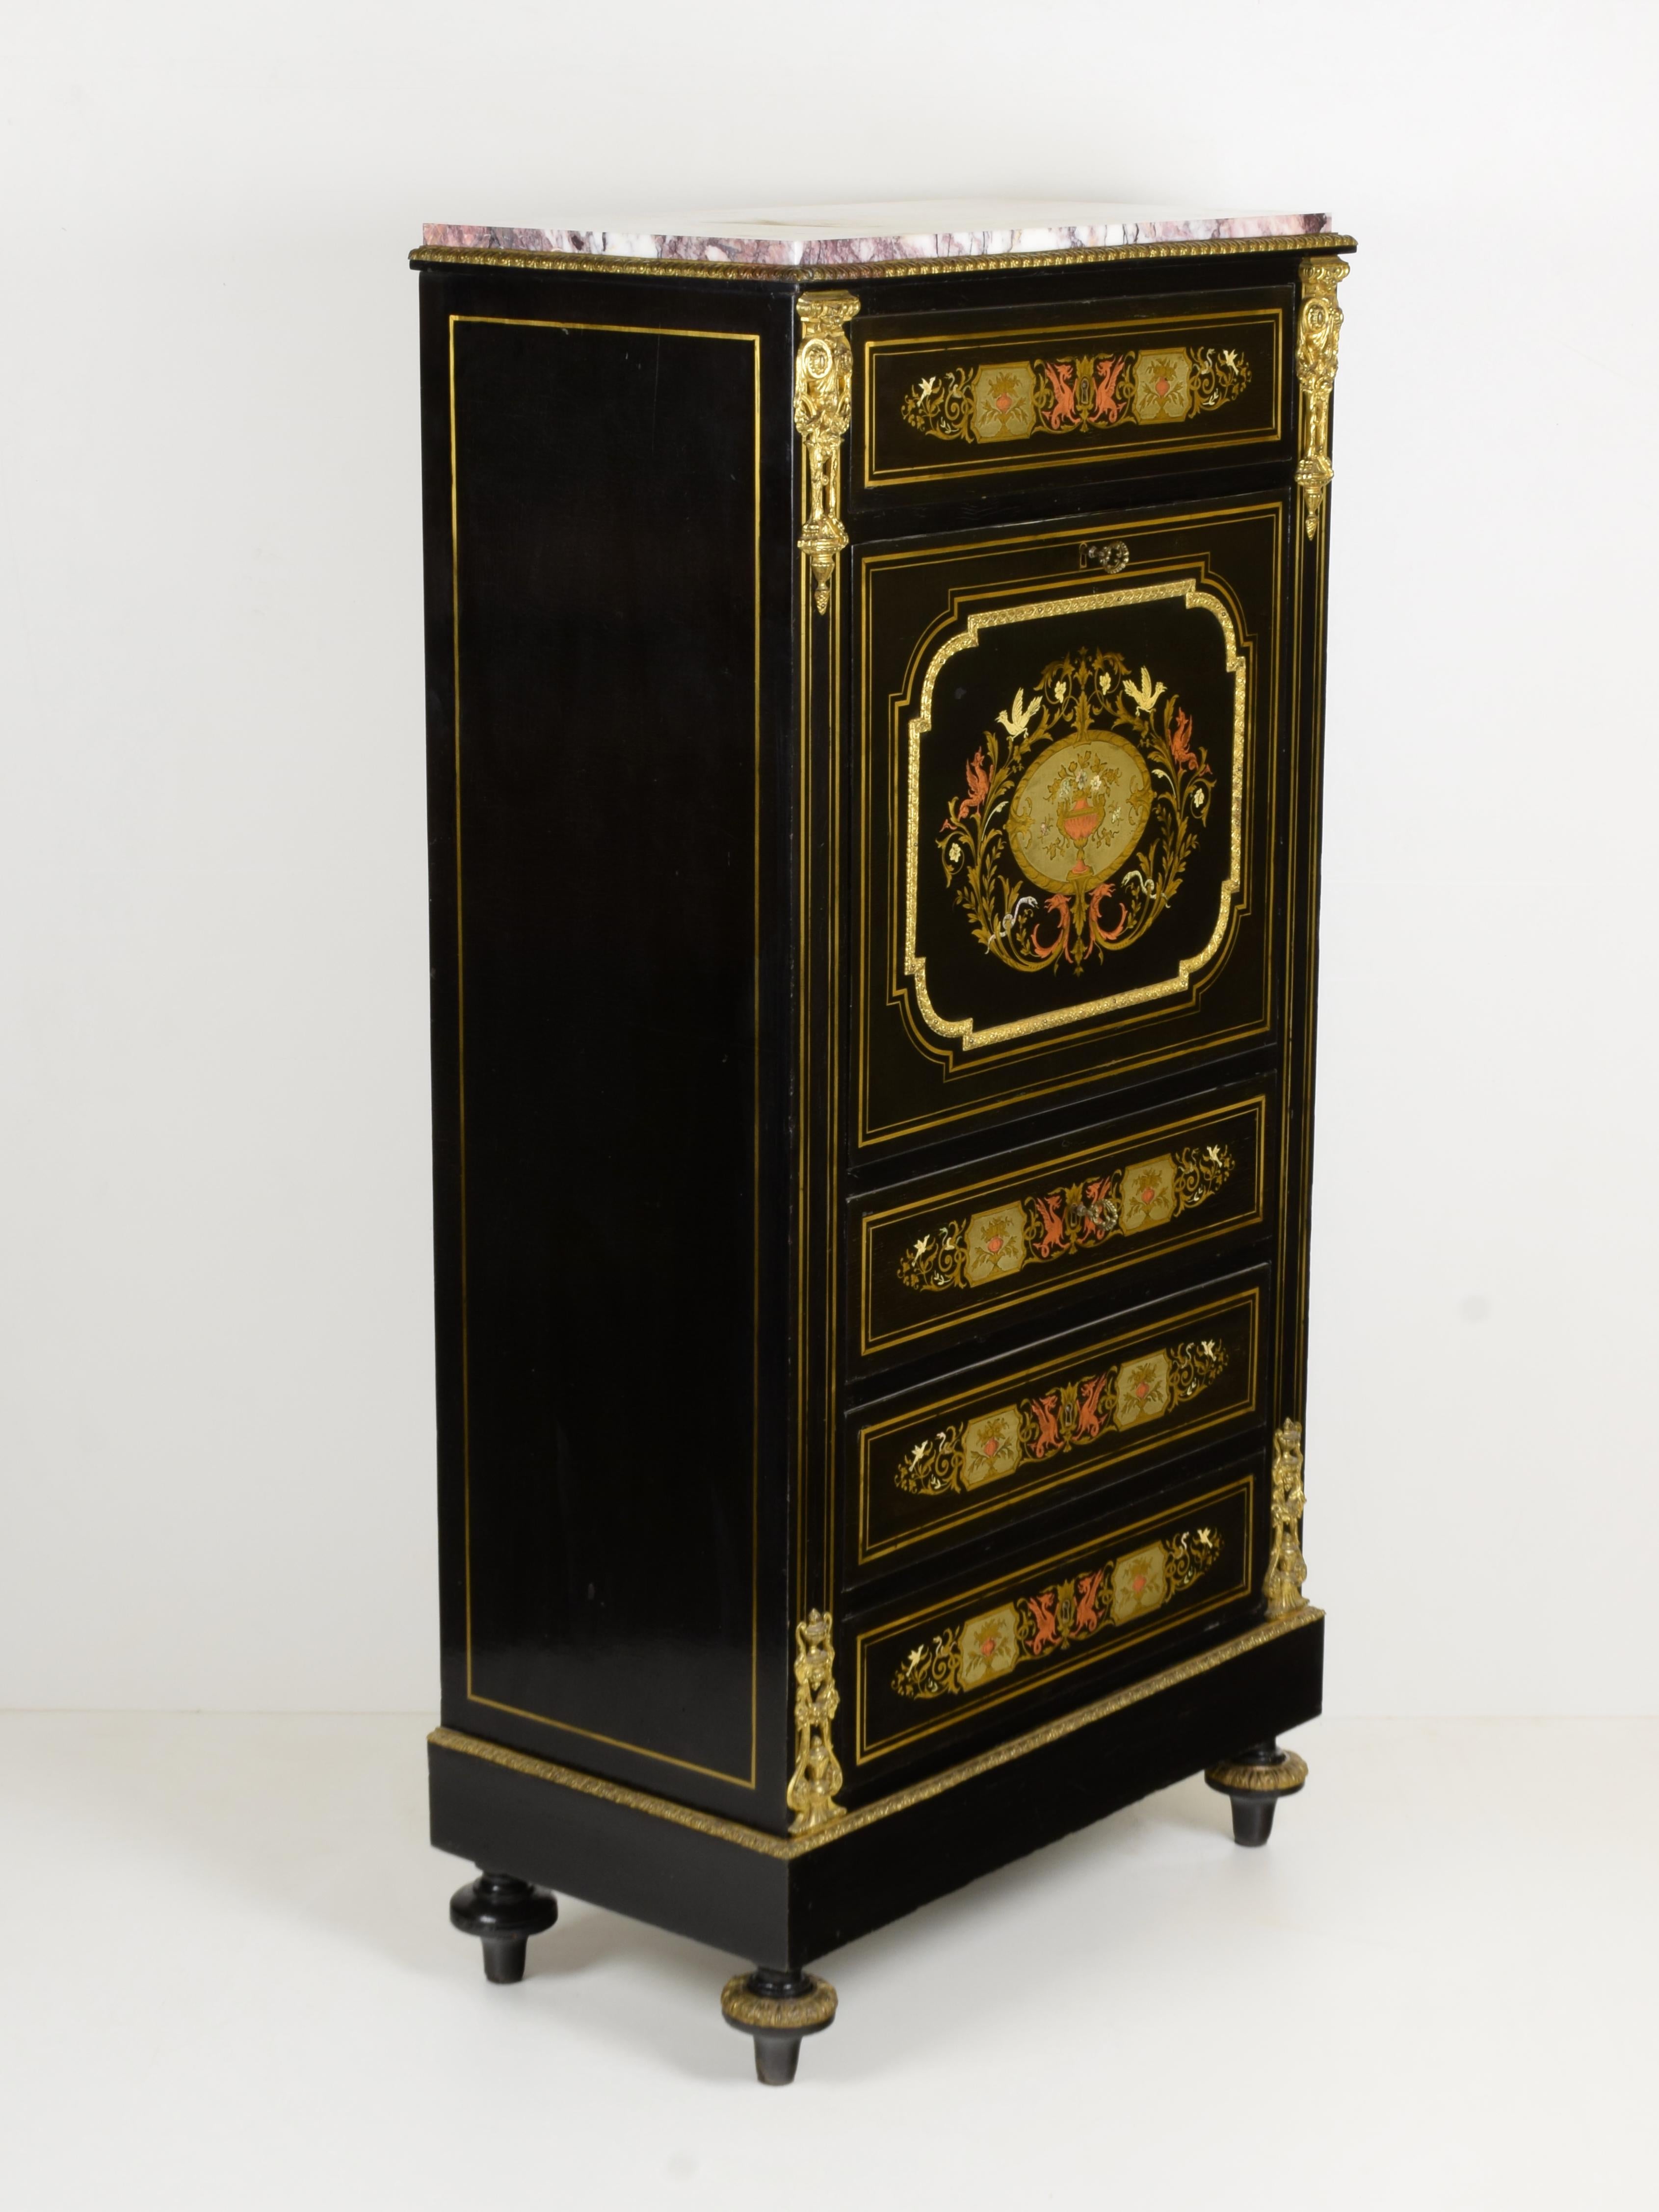 France, second half '800
Lastronate in ebanized wood.
Inlay in brass, copper, pewter, mother-of-pearl.
Marble top in 